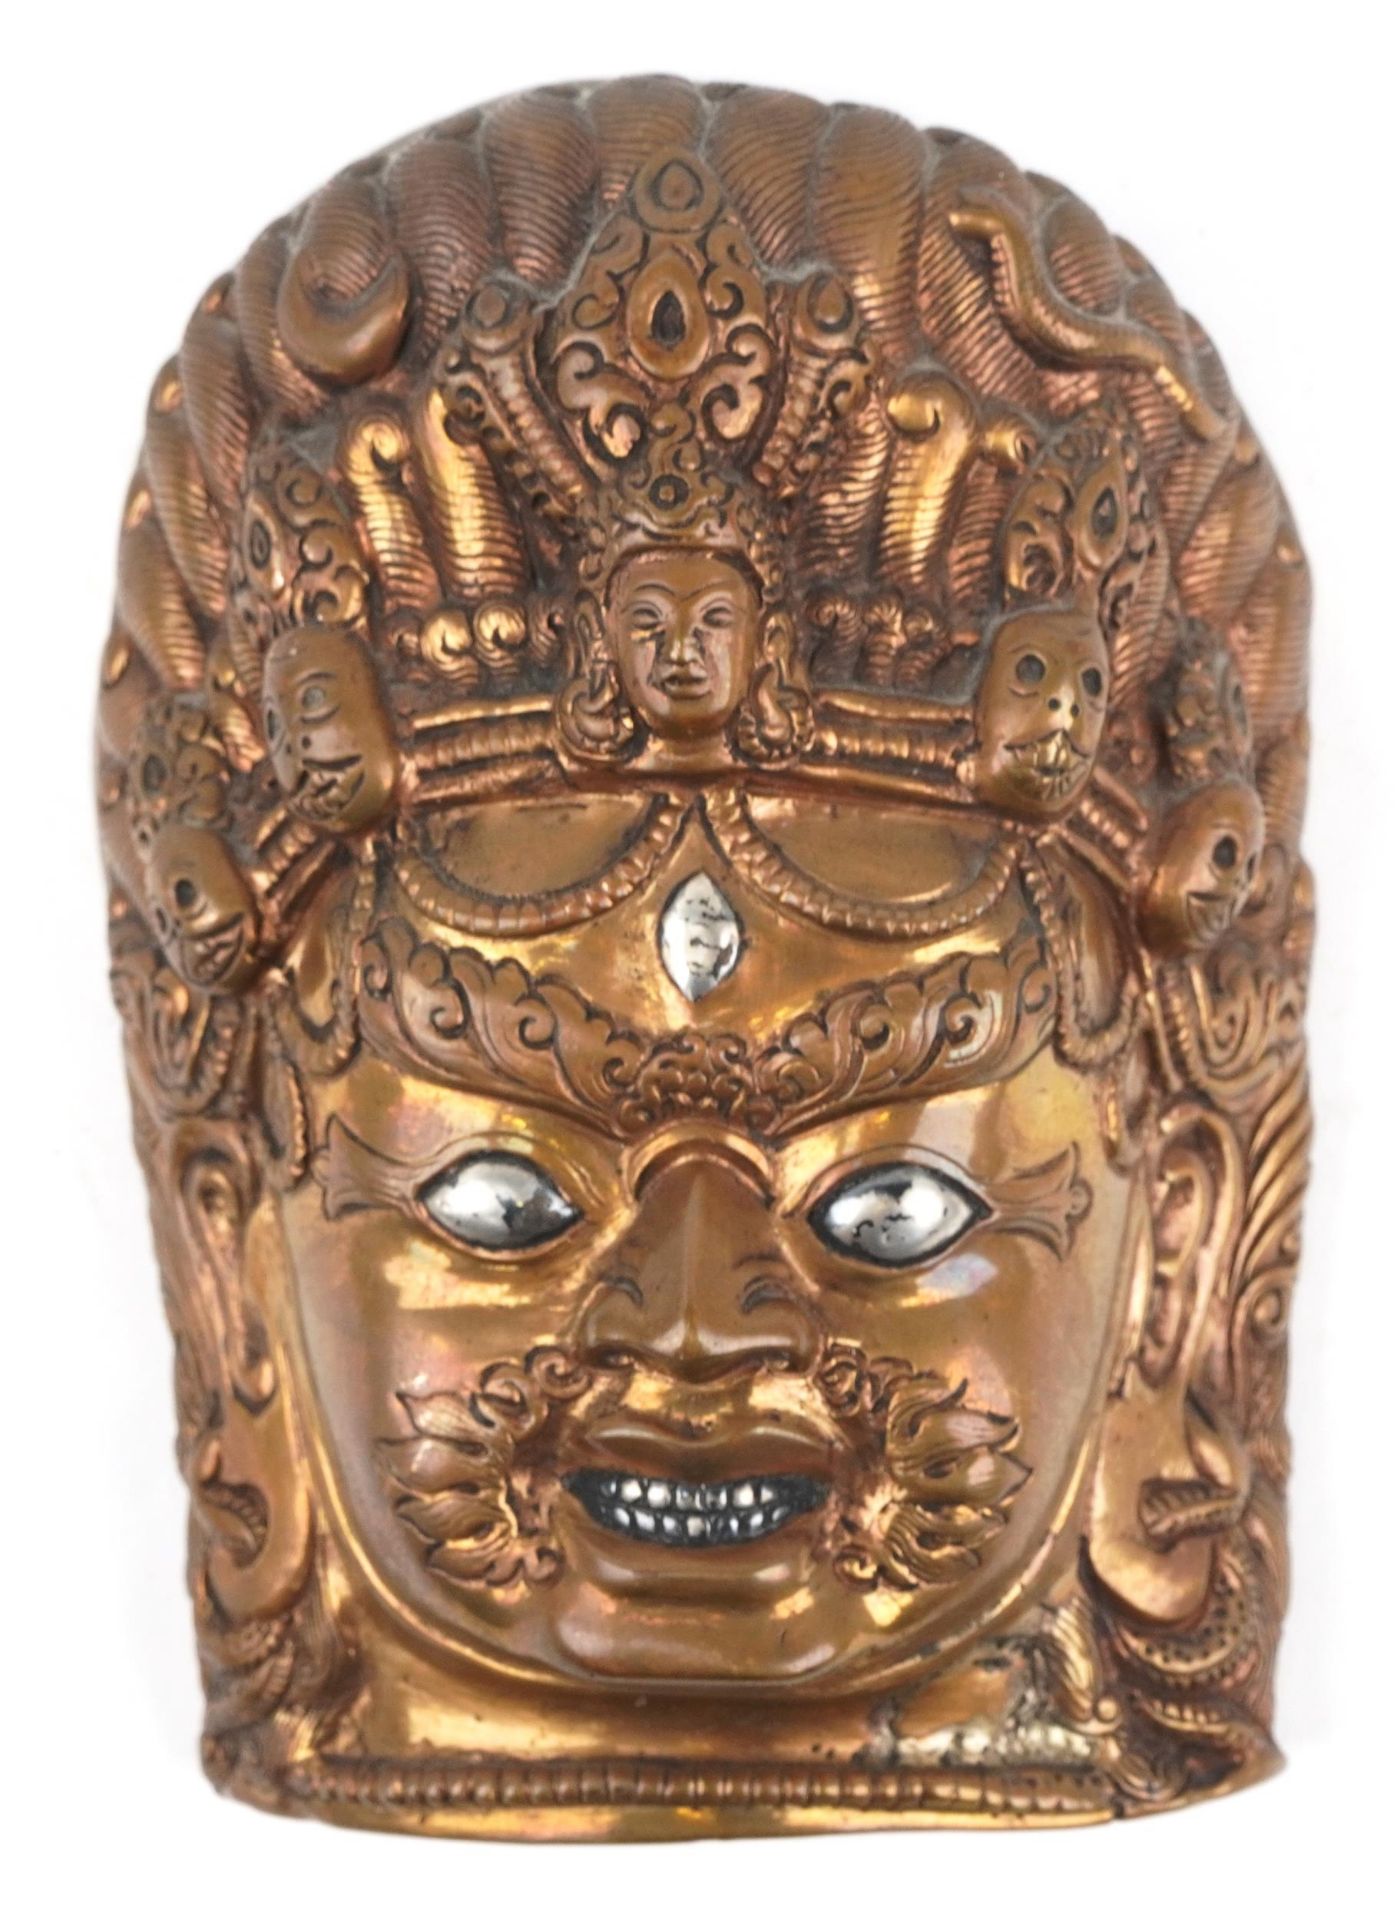 Antique Tibetan or Indian patinated bronze mask of Bhairava with silver eyes and teeth, 13.5cm